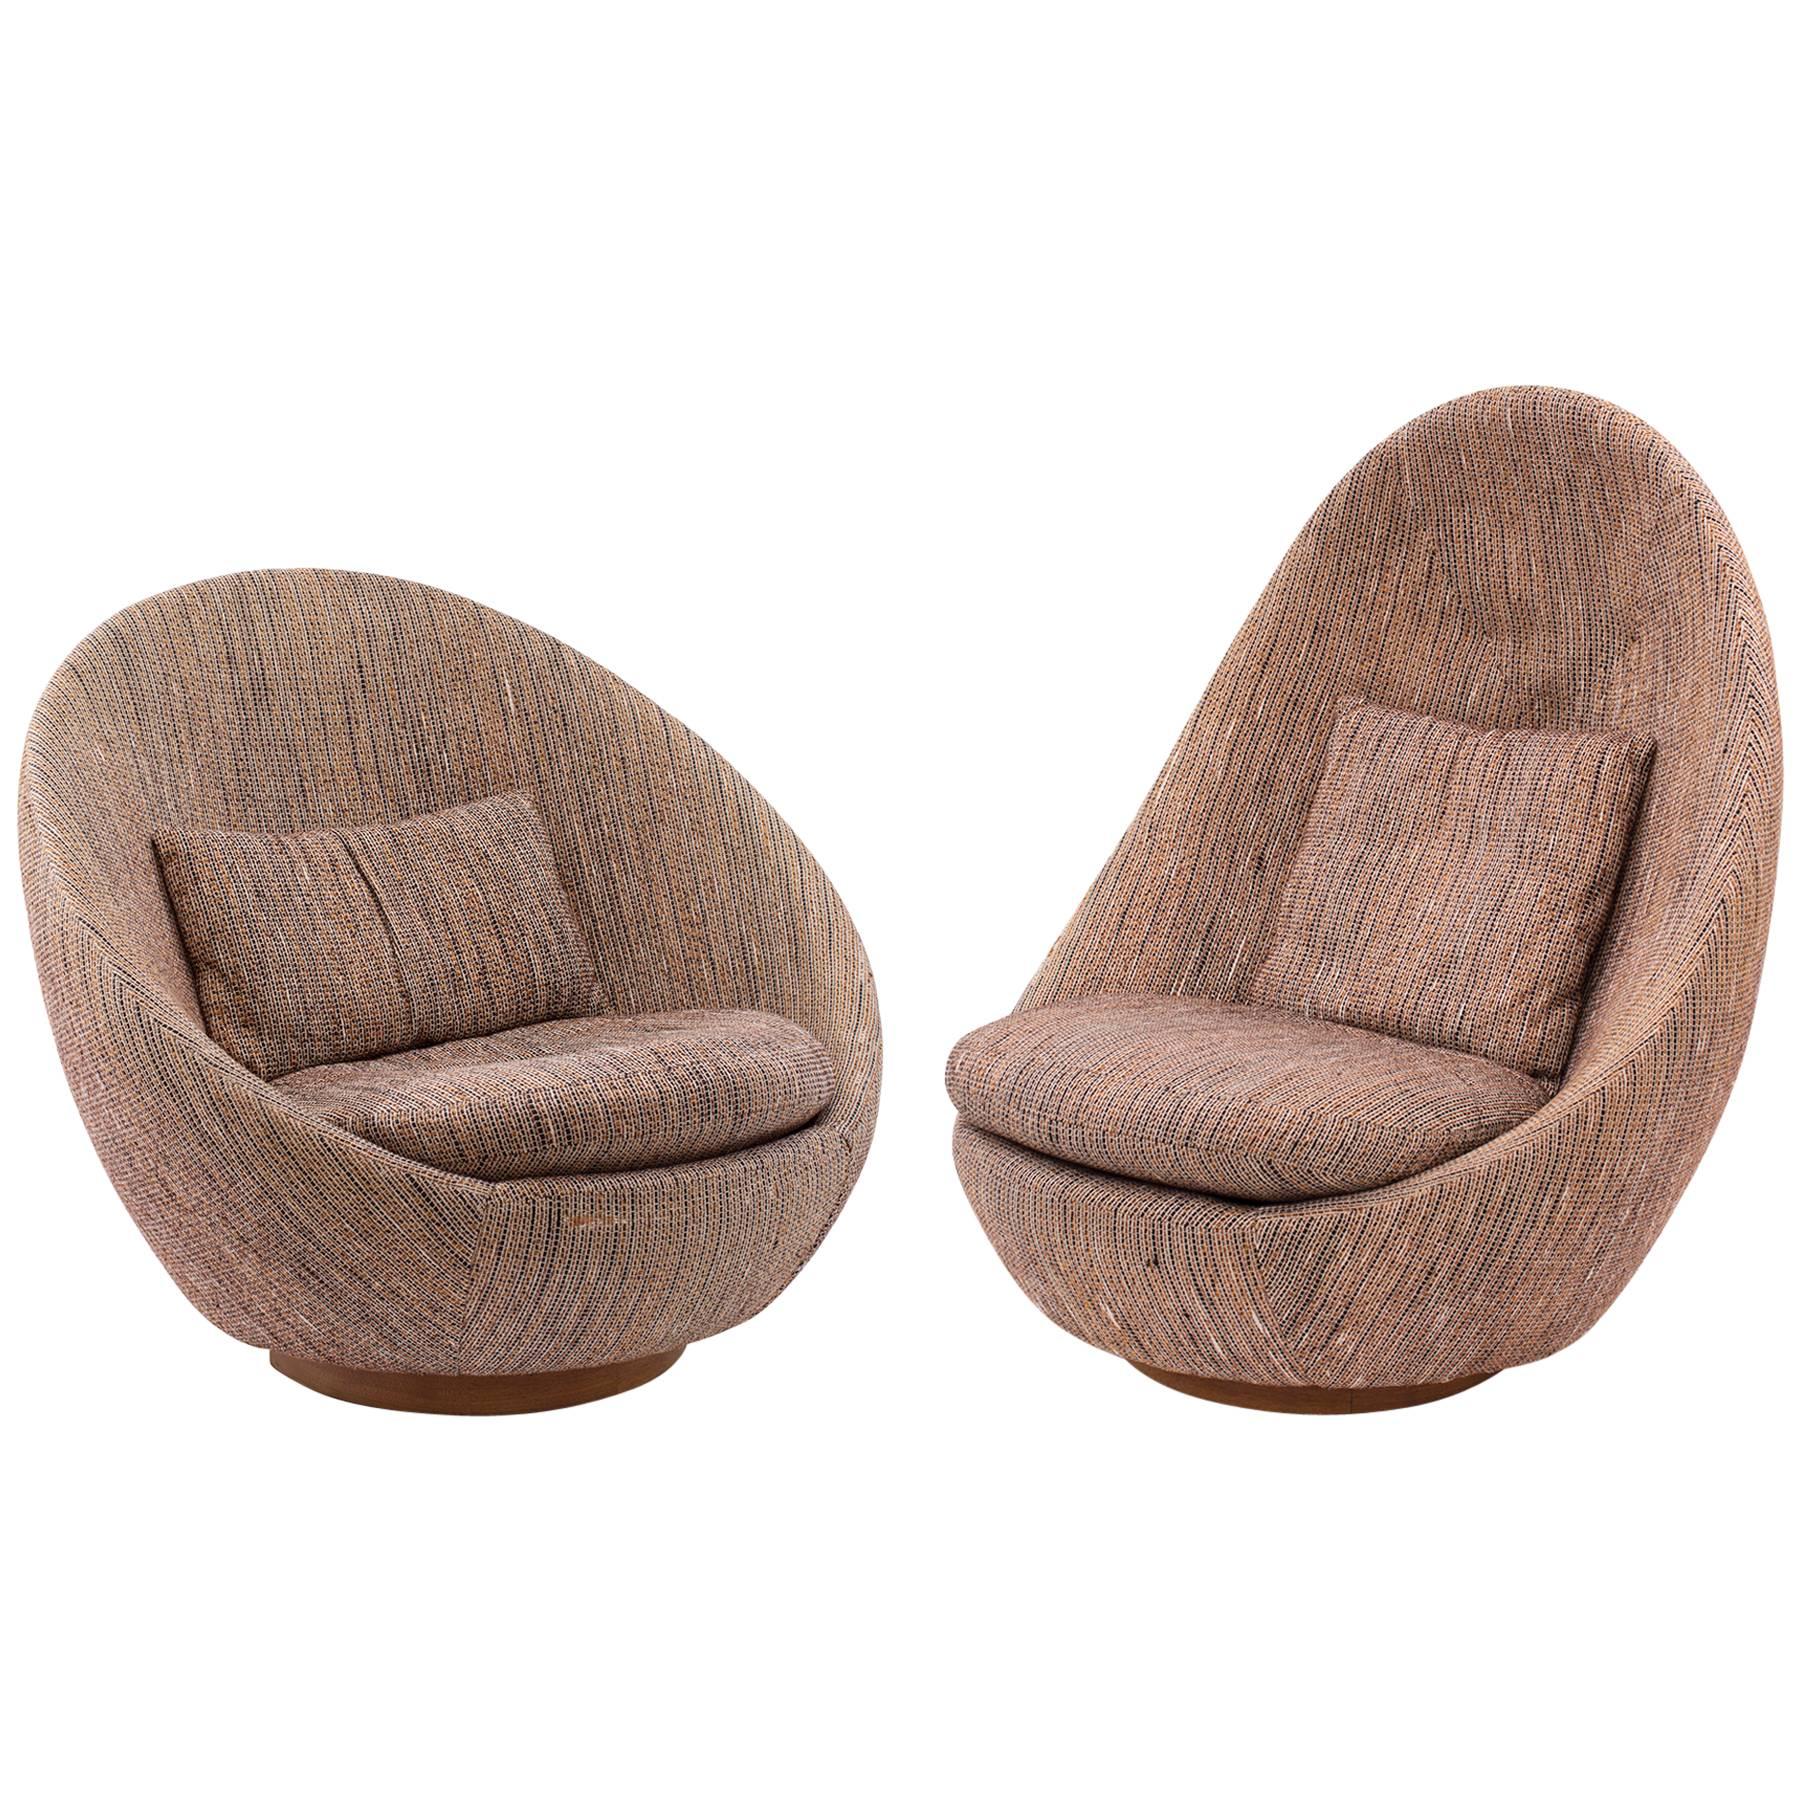 Rare "His and Hers" Milo Baughman Egg Chairs